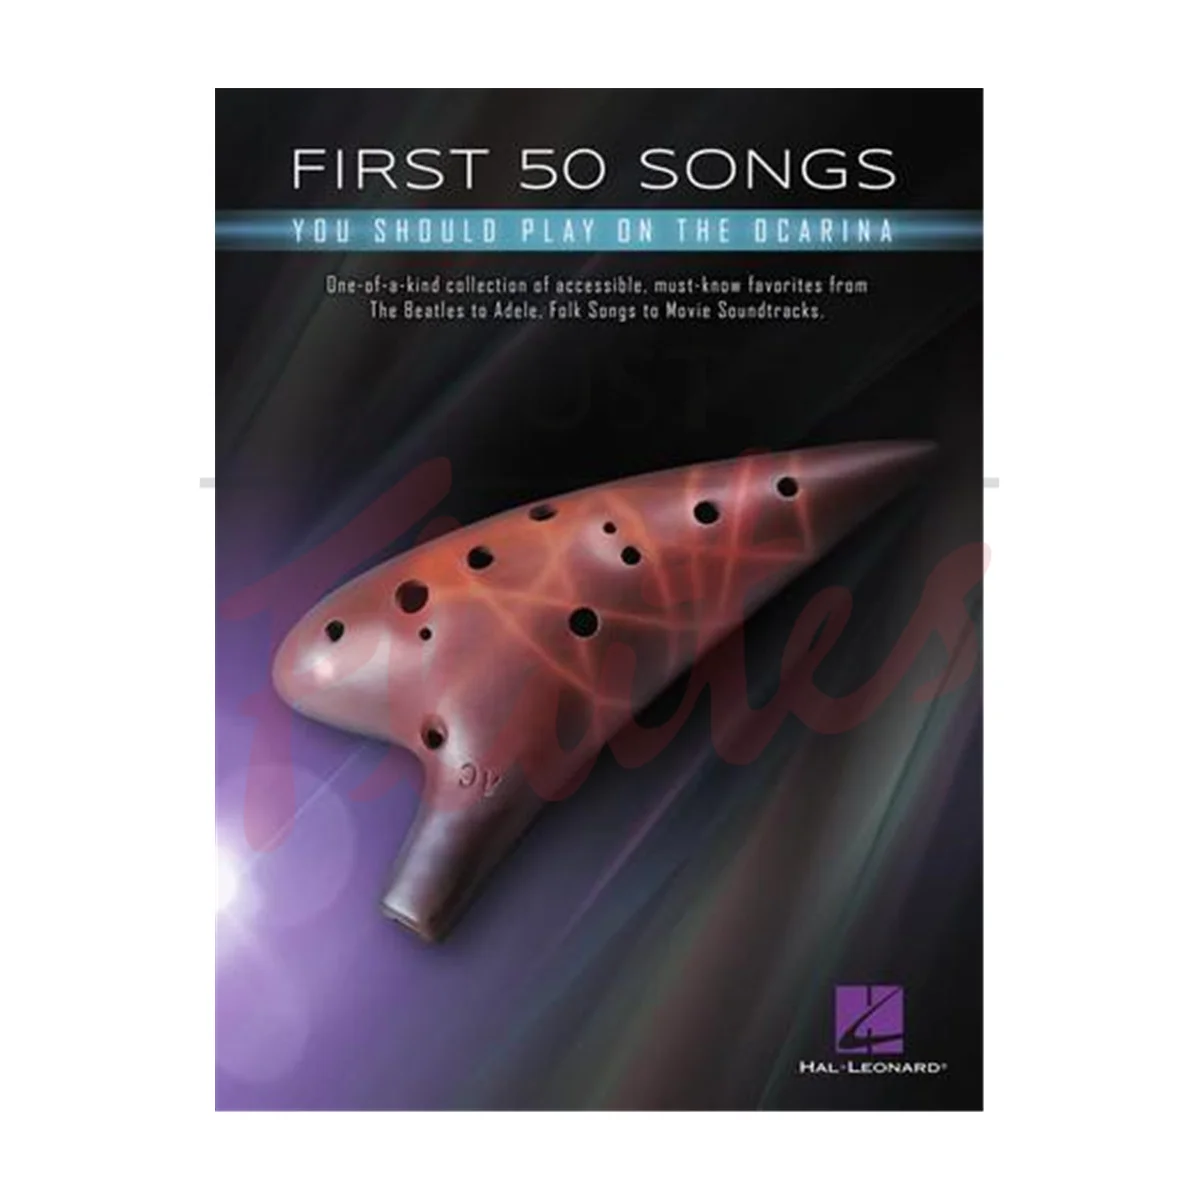 First 50 Songs You Should Play on Ocarina